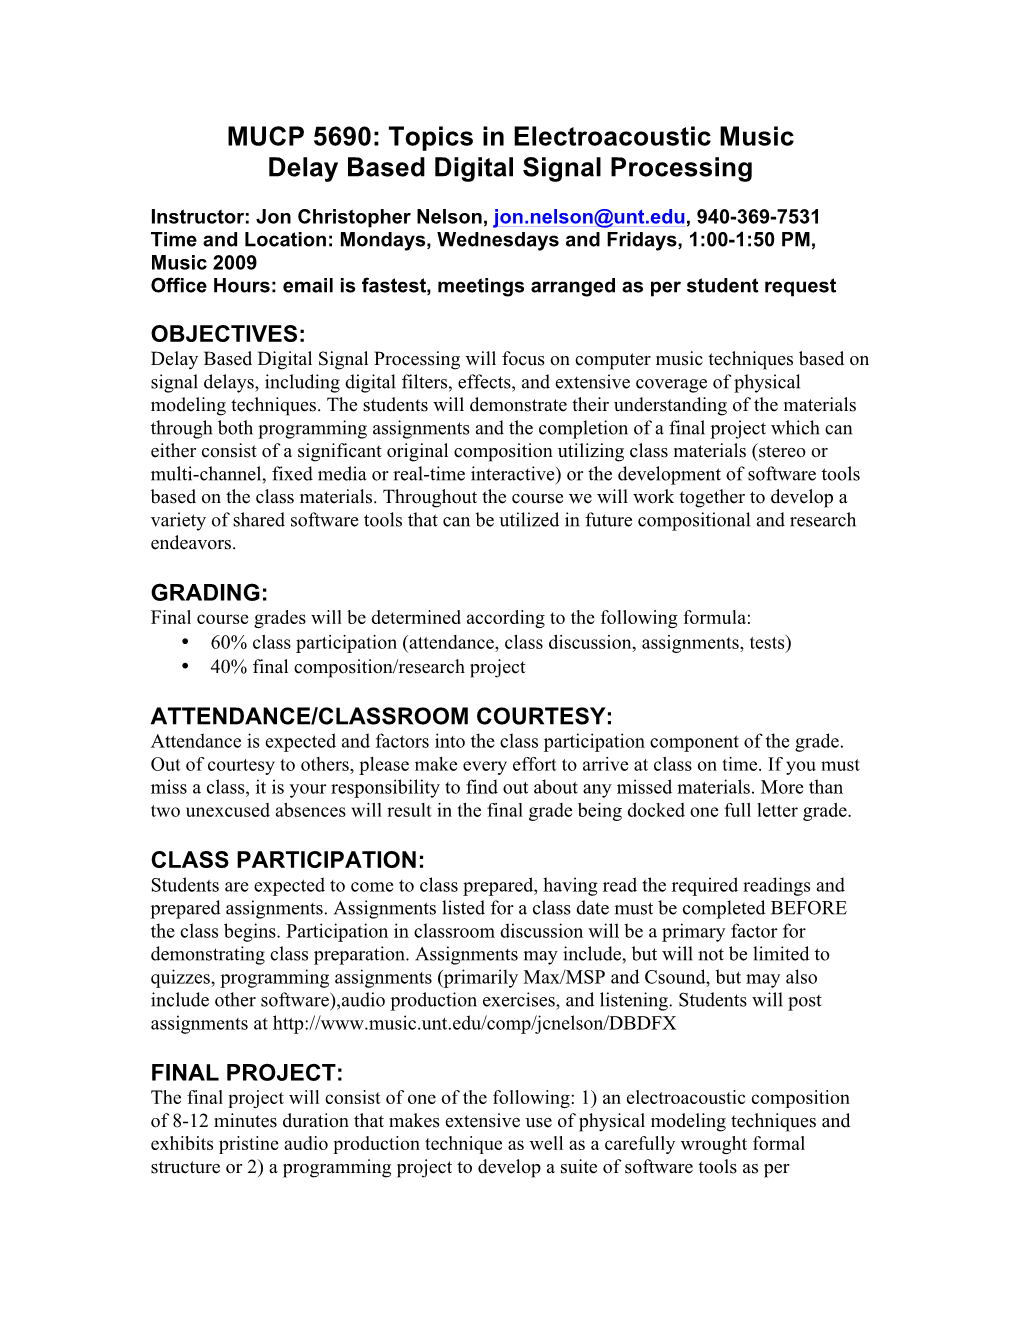 Topics in Electroacoustic Music Delay Based Digital Signal Processing